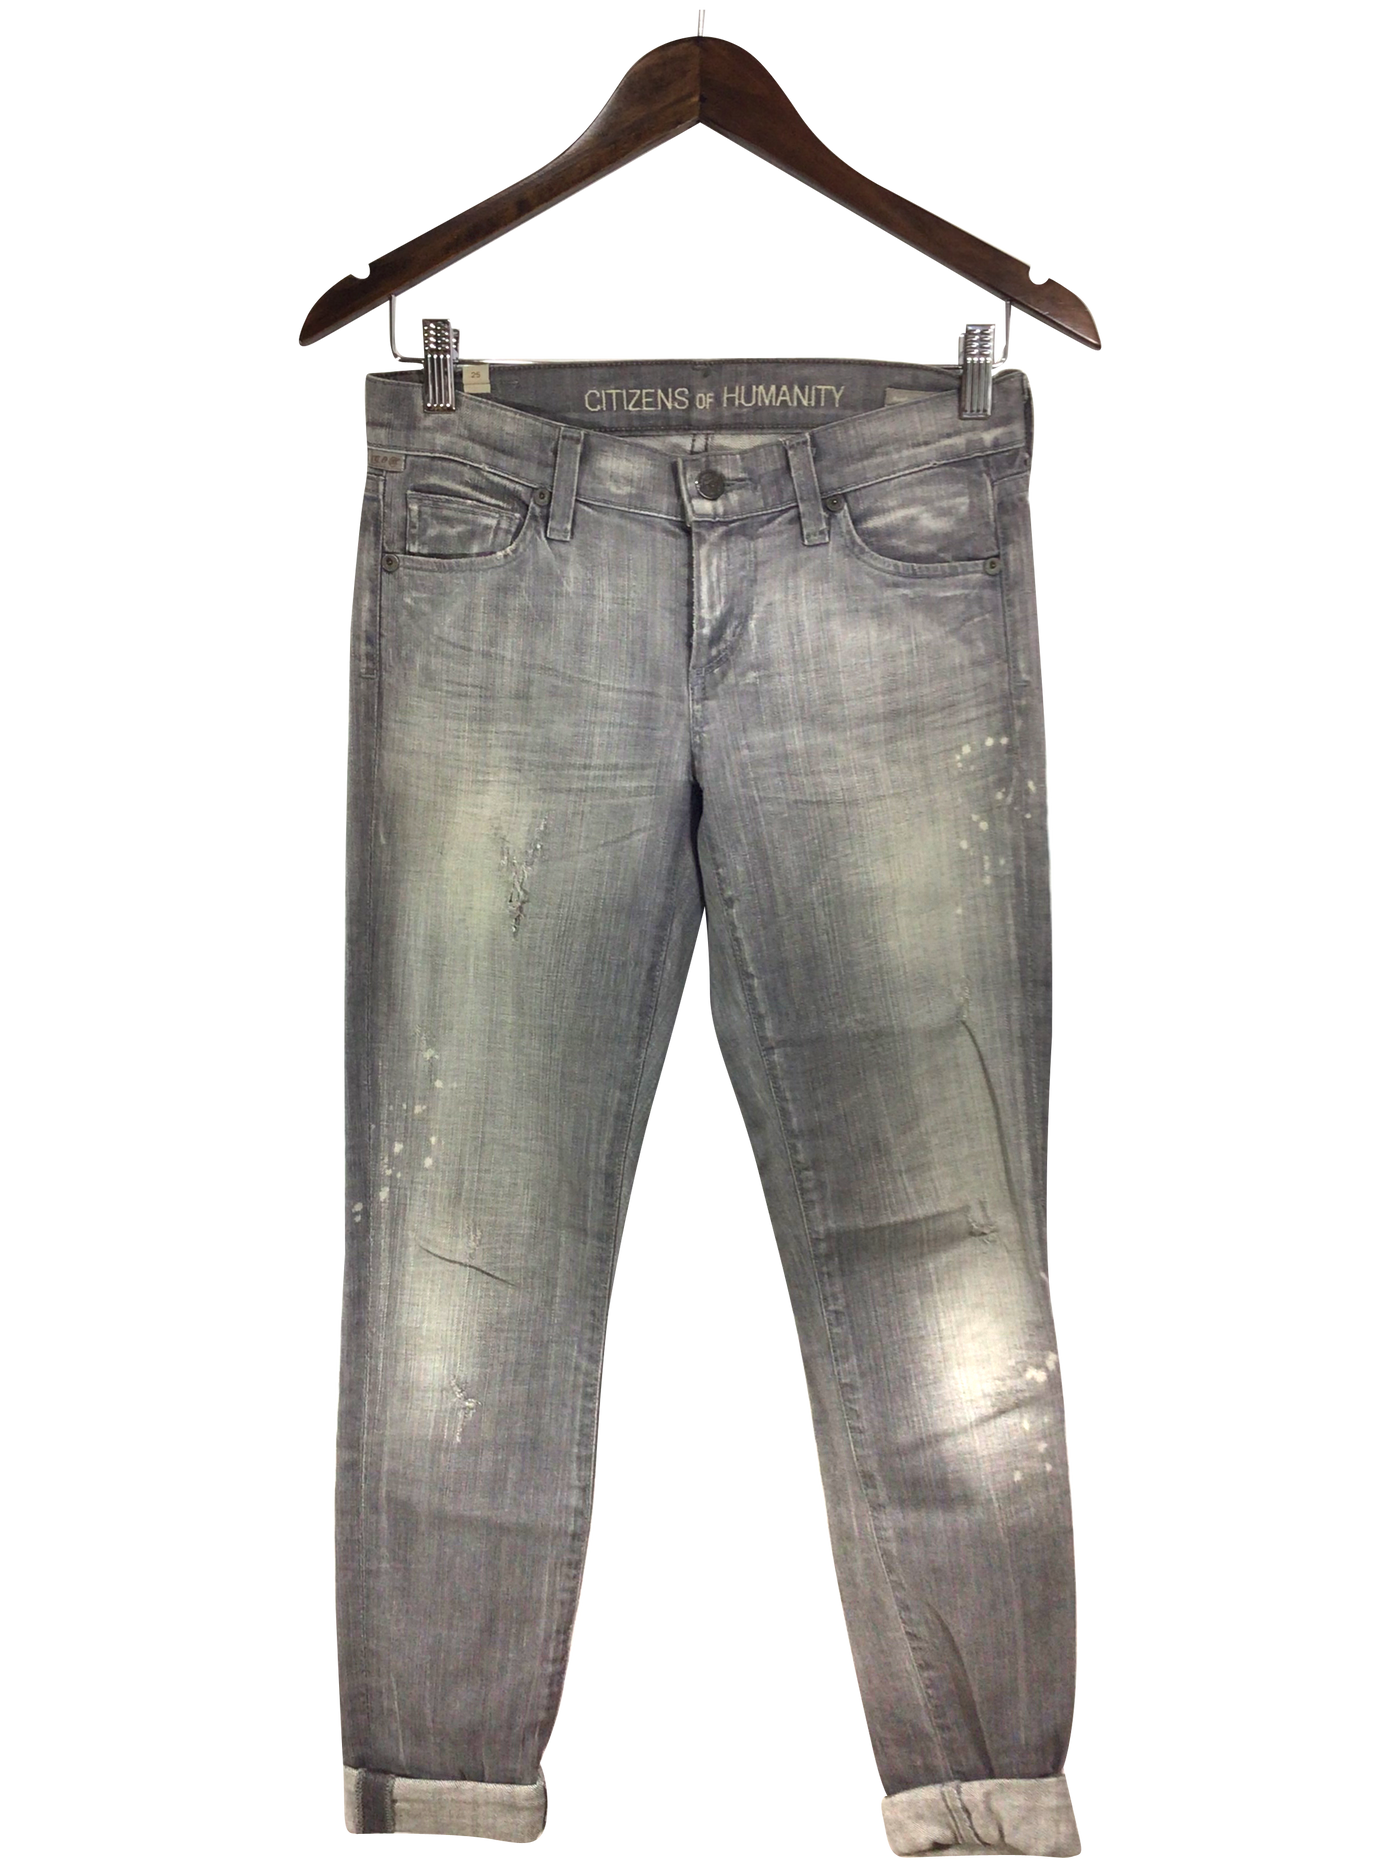 CITIZENS OF HUMANITY Straight-legged Jeans Regular fit in Gray - Size 25 | 19.24 $ KOOP